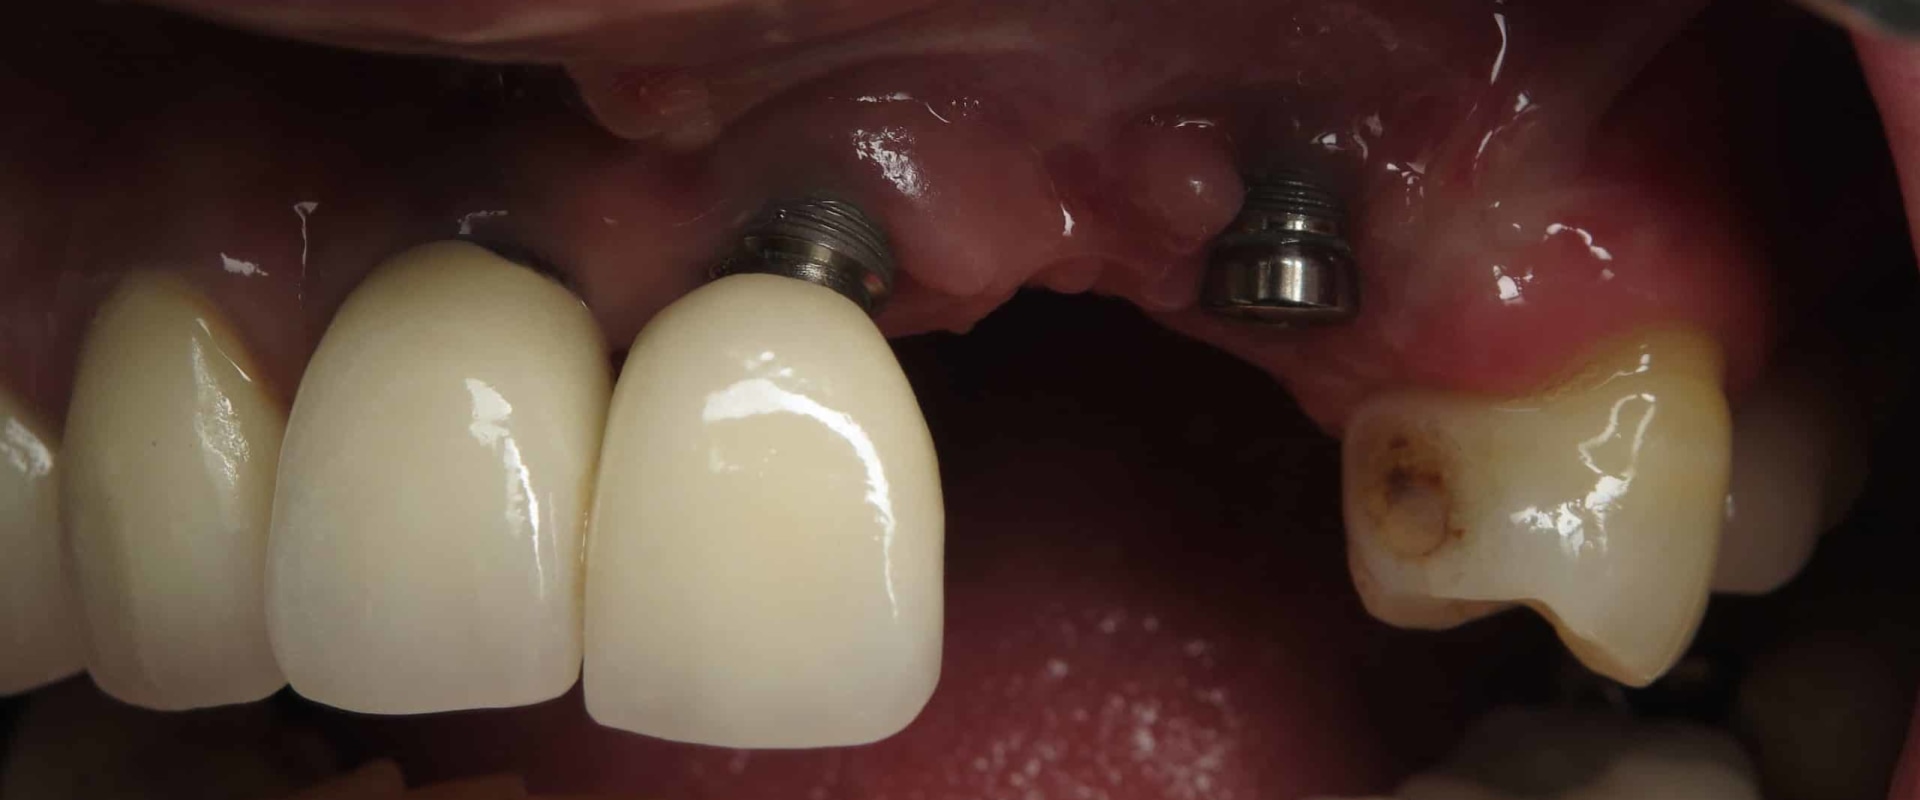 What Causes Dental Implants to Fail Over Time?